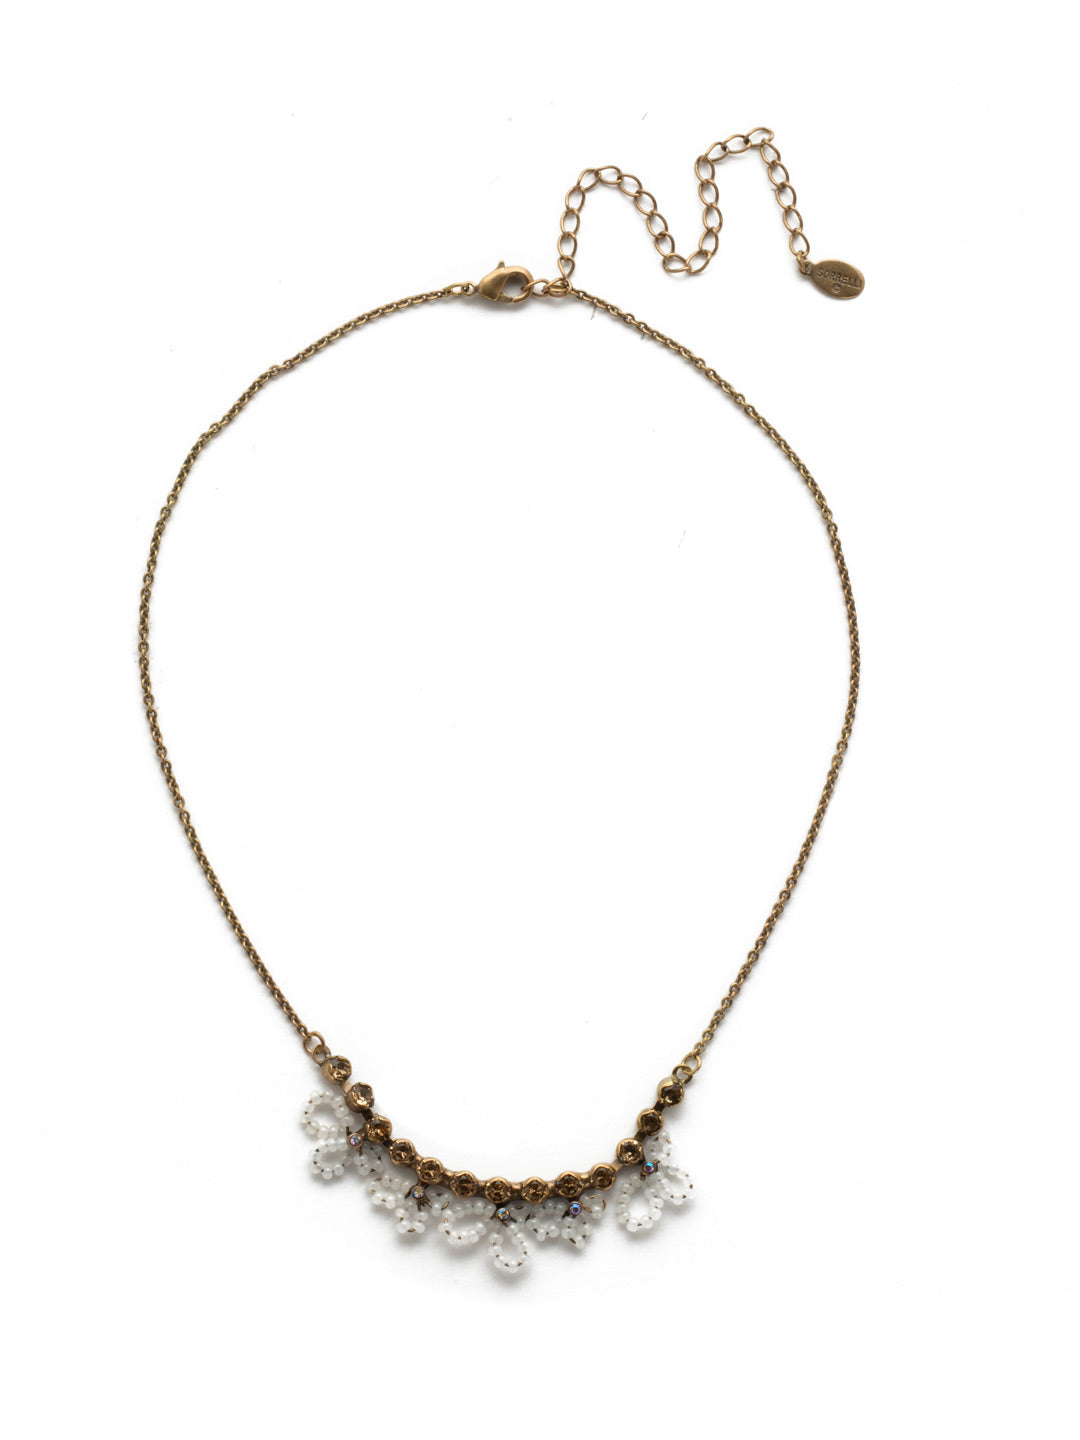 Glowlight Tennis Necklace - NEH14AGROB - <p>A simple adjustable strand accented with crystals is elevated with handcrafted beadwork in this need-it-now necklace. From Sorrelli's Rocky Beach collection in our Antique Gold-tone finish.</p>